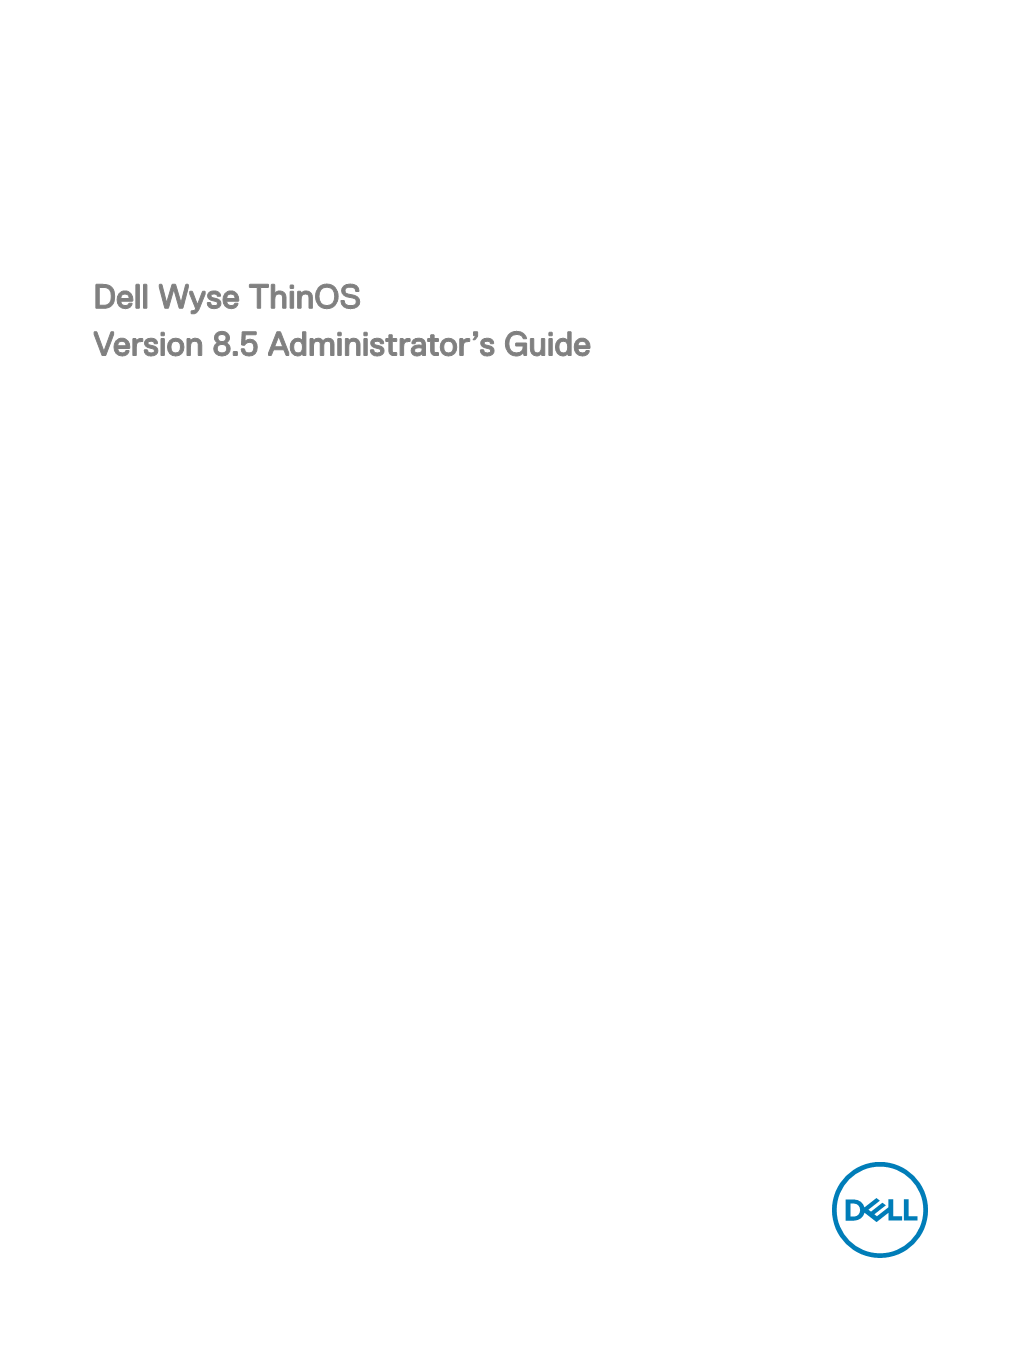 Dell Wyse Thinos Version 8.5 Administrator's Guide